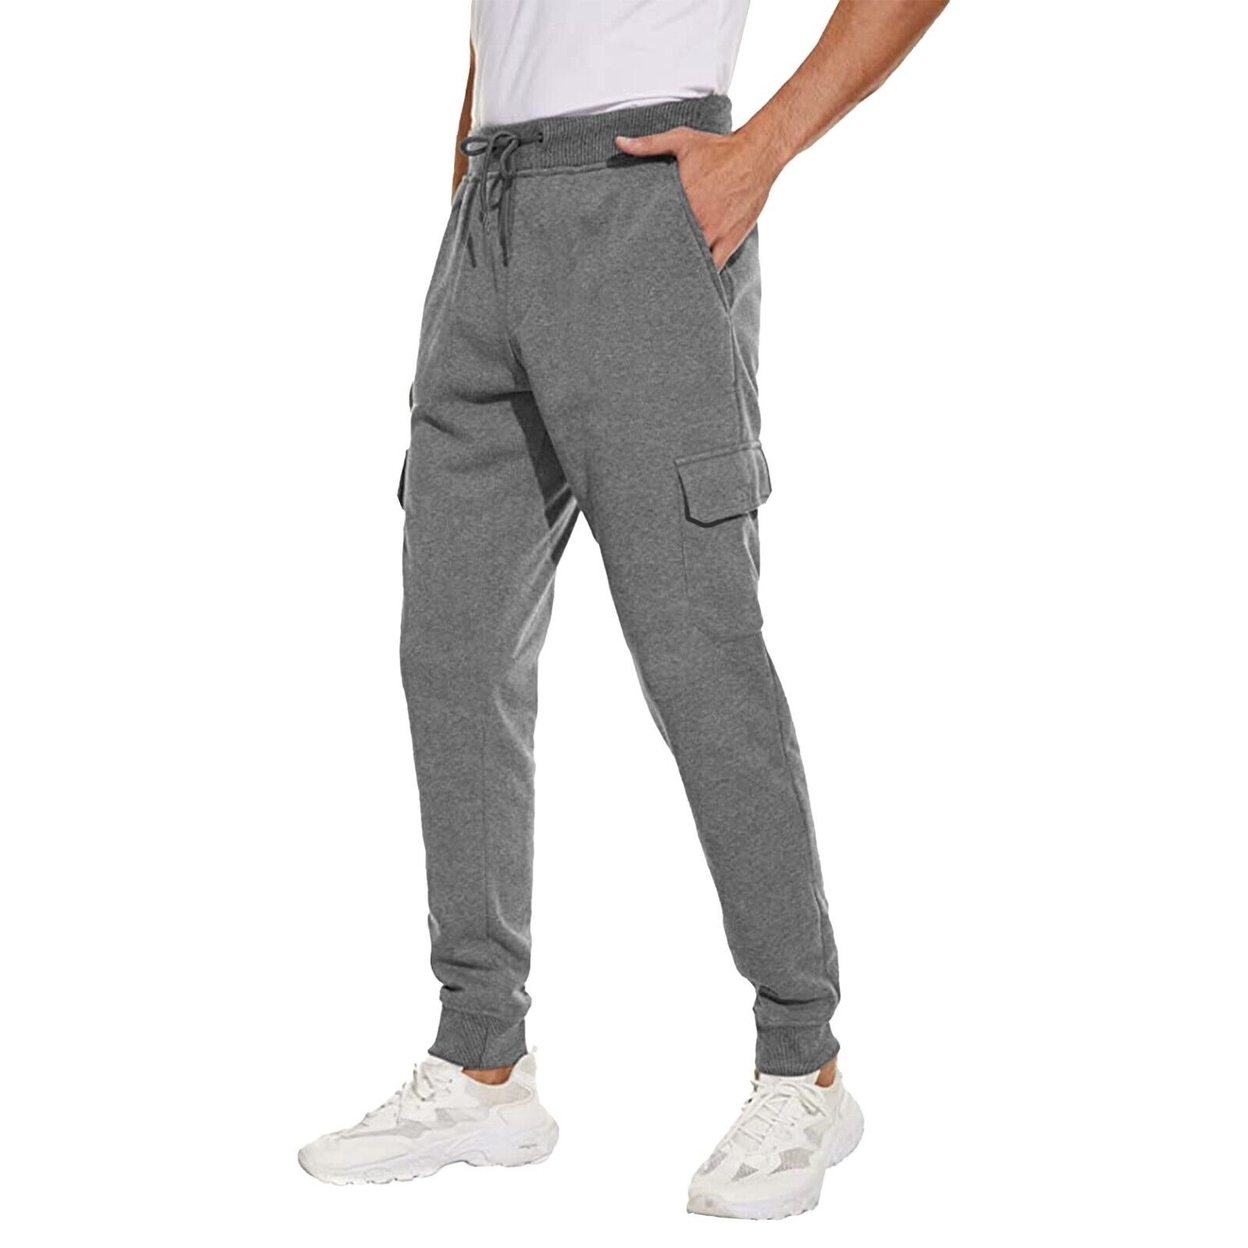 Men's Ultra Soft Winter Warm Thick Sweat Pant Athletic Sherpa Lined Jogger Pants - Grey, X-large